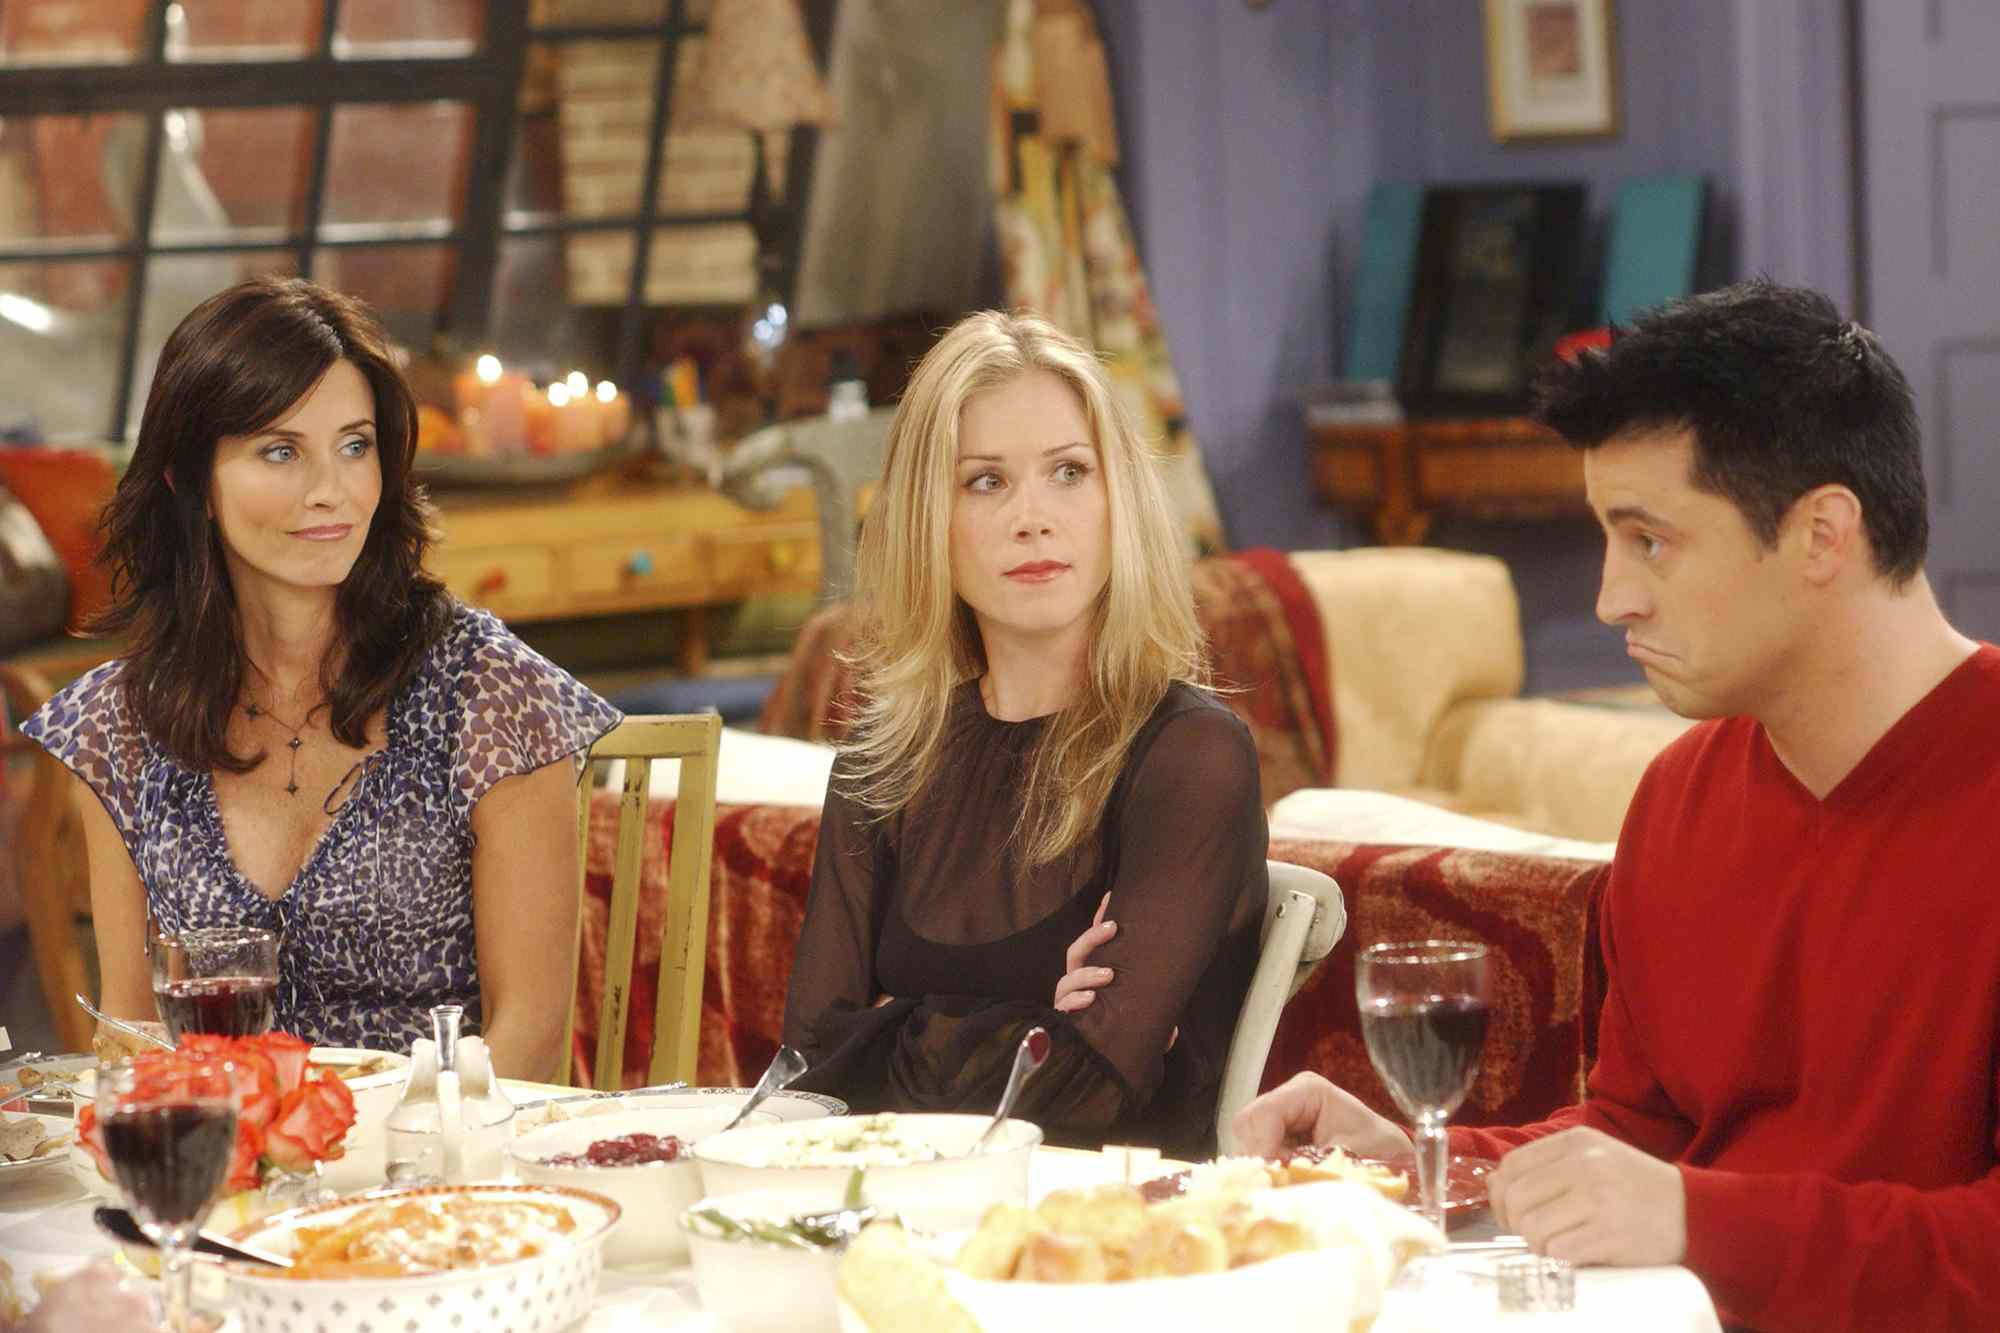 'Friends' — "The One with Rachel's Other Sister" -- Episode 8 -- Aired 11/21/2002 -- Pictured: (l-r) Courteney Cox as Monica Geller-Bing, Christina Applegate as Amy Green, Matt LeBlanc as Joey Tribbiani -- Photo by: Danny Feld/NBCU Photo Bank